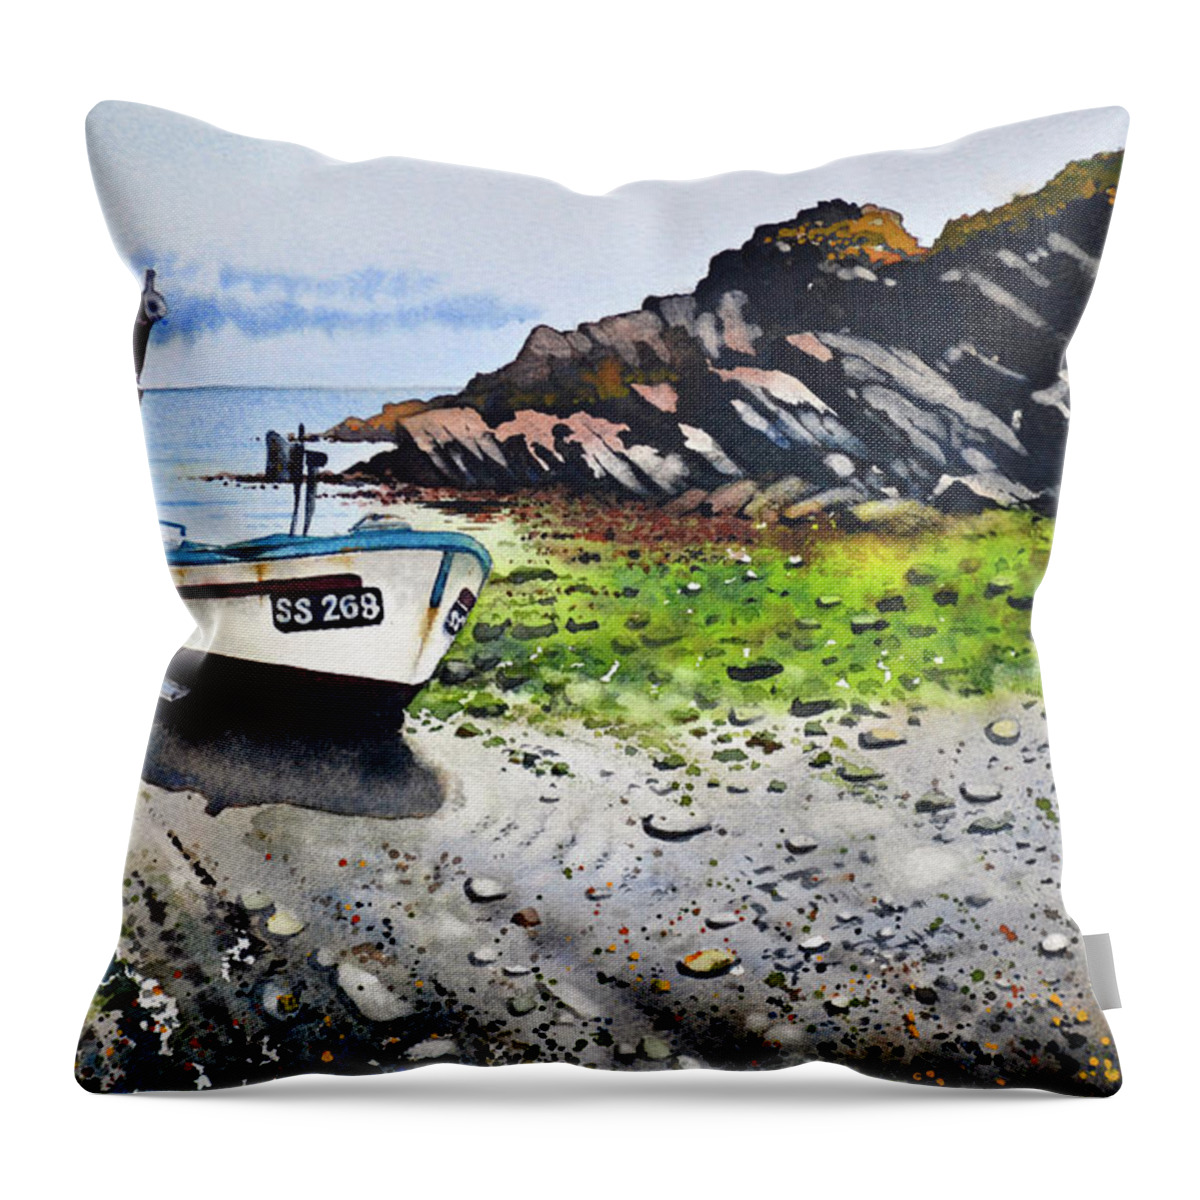 Tide Out Throw Pillow featuring the painting Fishing Boat Cadgwith by Paul Dene Marlor